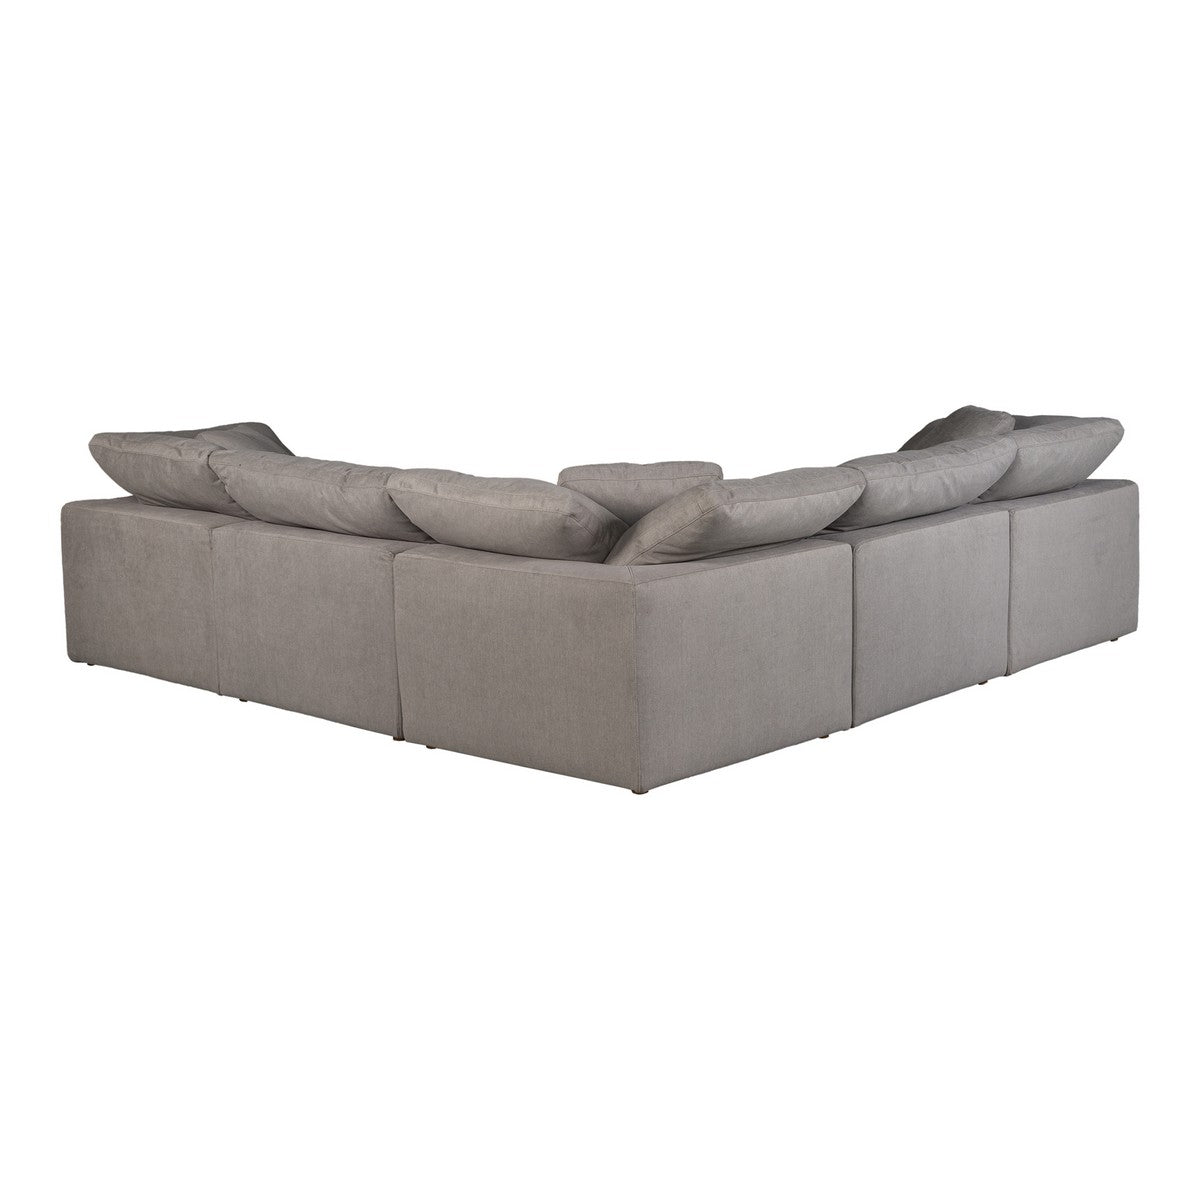 Moe's Home Collection Terra Condo Classic L Modular Sectional Livesmart Fabric Light Grey - YJ-1017-29